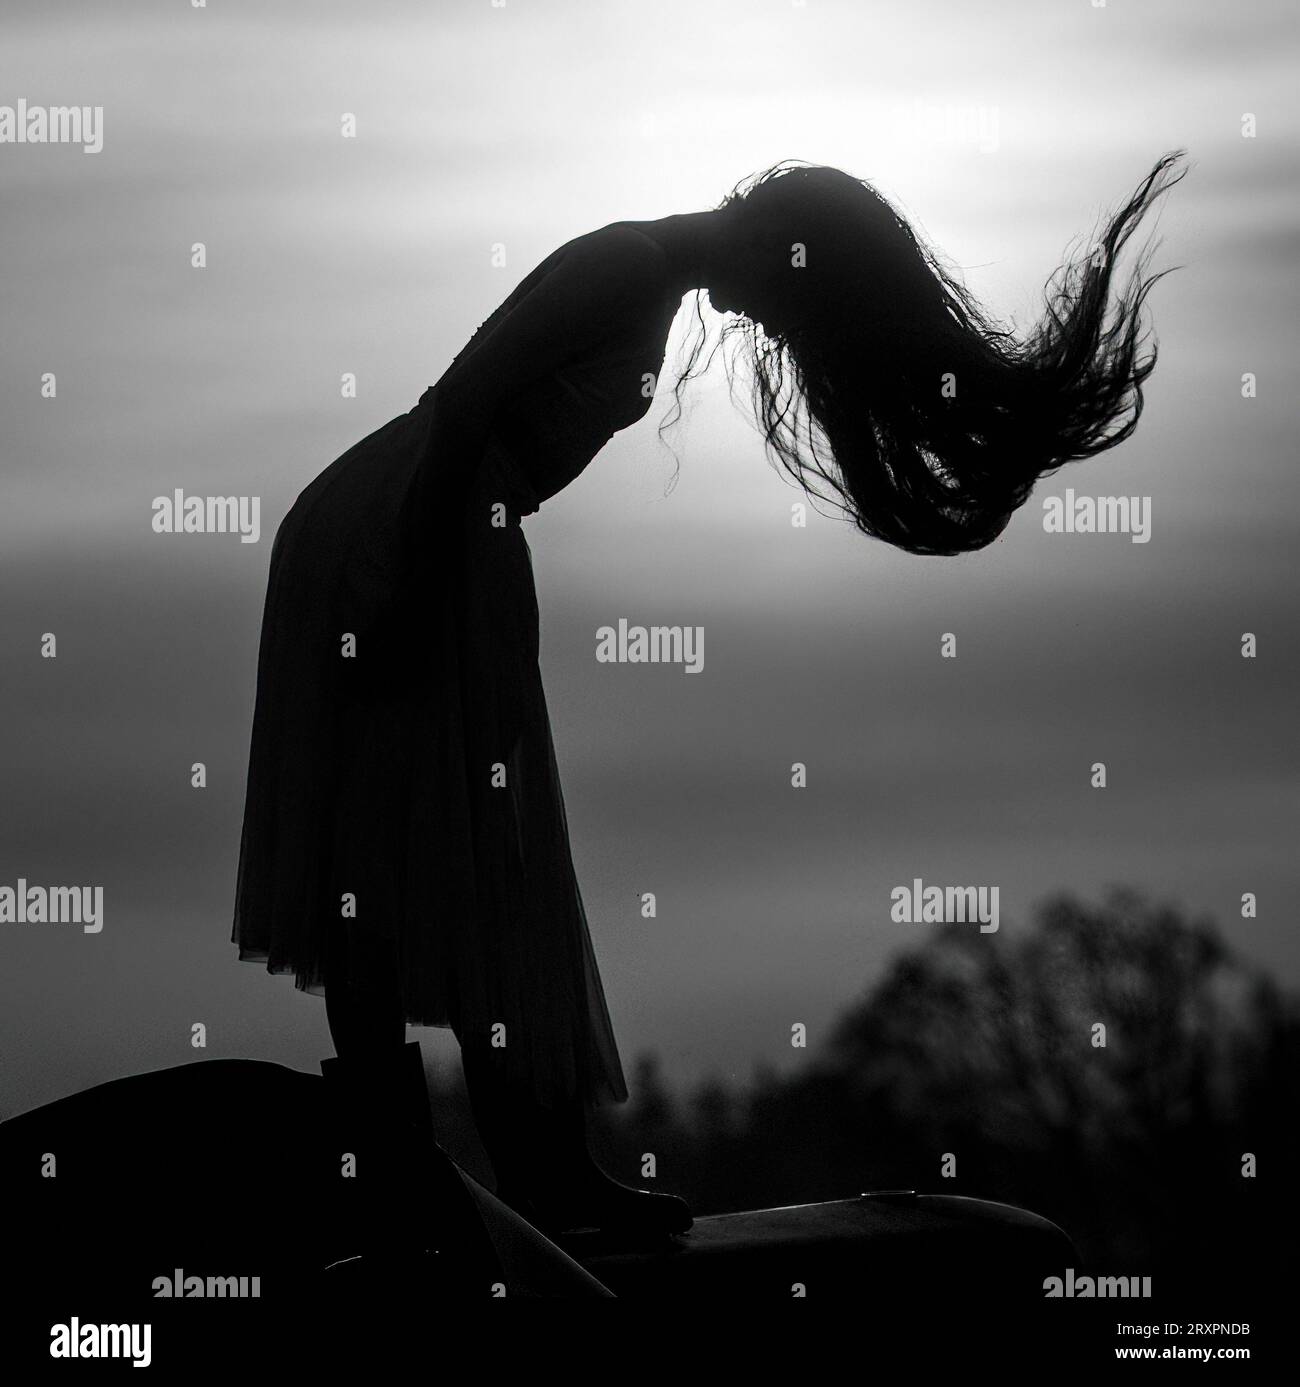 Silhouette of long-haired woman standing against setting sun Stock Photo